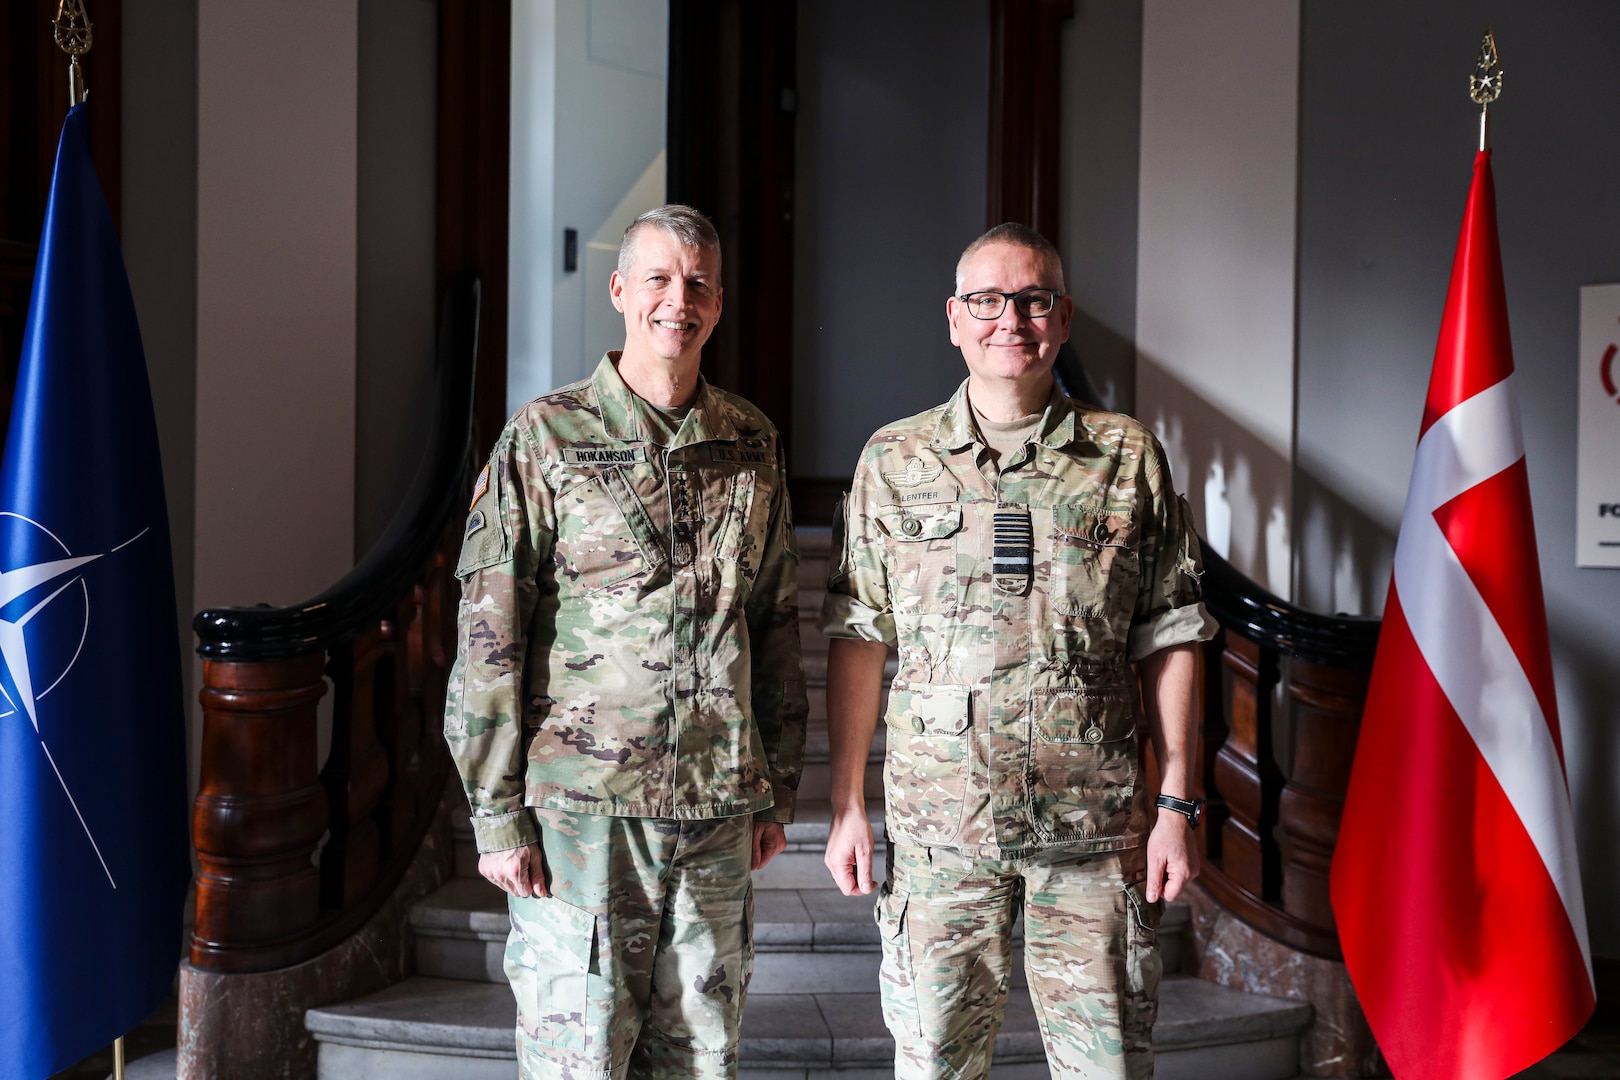 Army Gen. Daniel Hokanson, chief of the National Guard Bureau, left, stands for a photo with Gen. Flemming Lentfer, the Danish Chief of Defense, at the Ministry of Defense, Copenhagen, Denmark, Jan. 23, 2024.